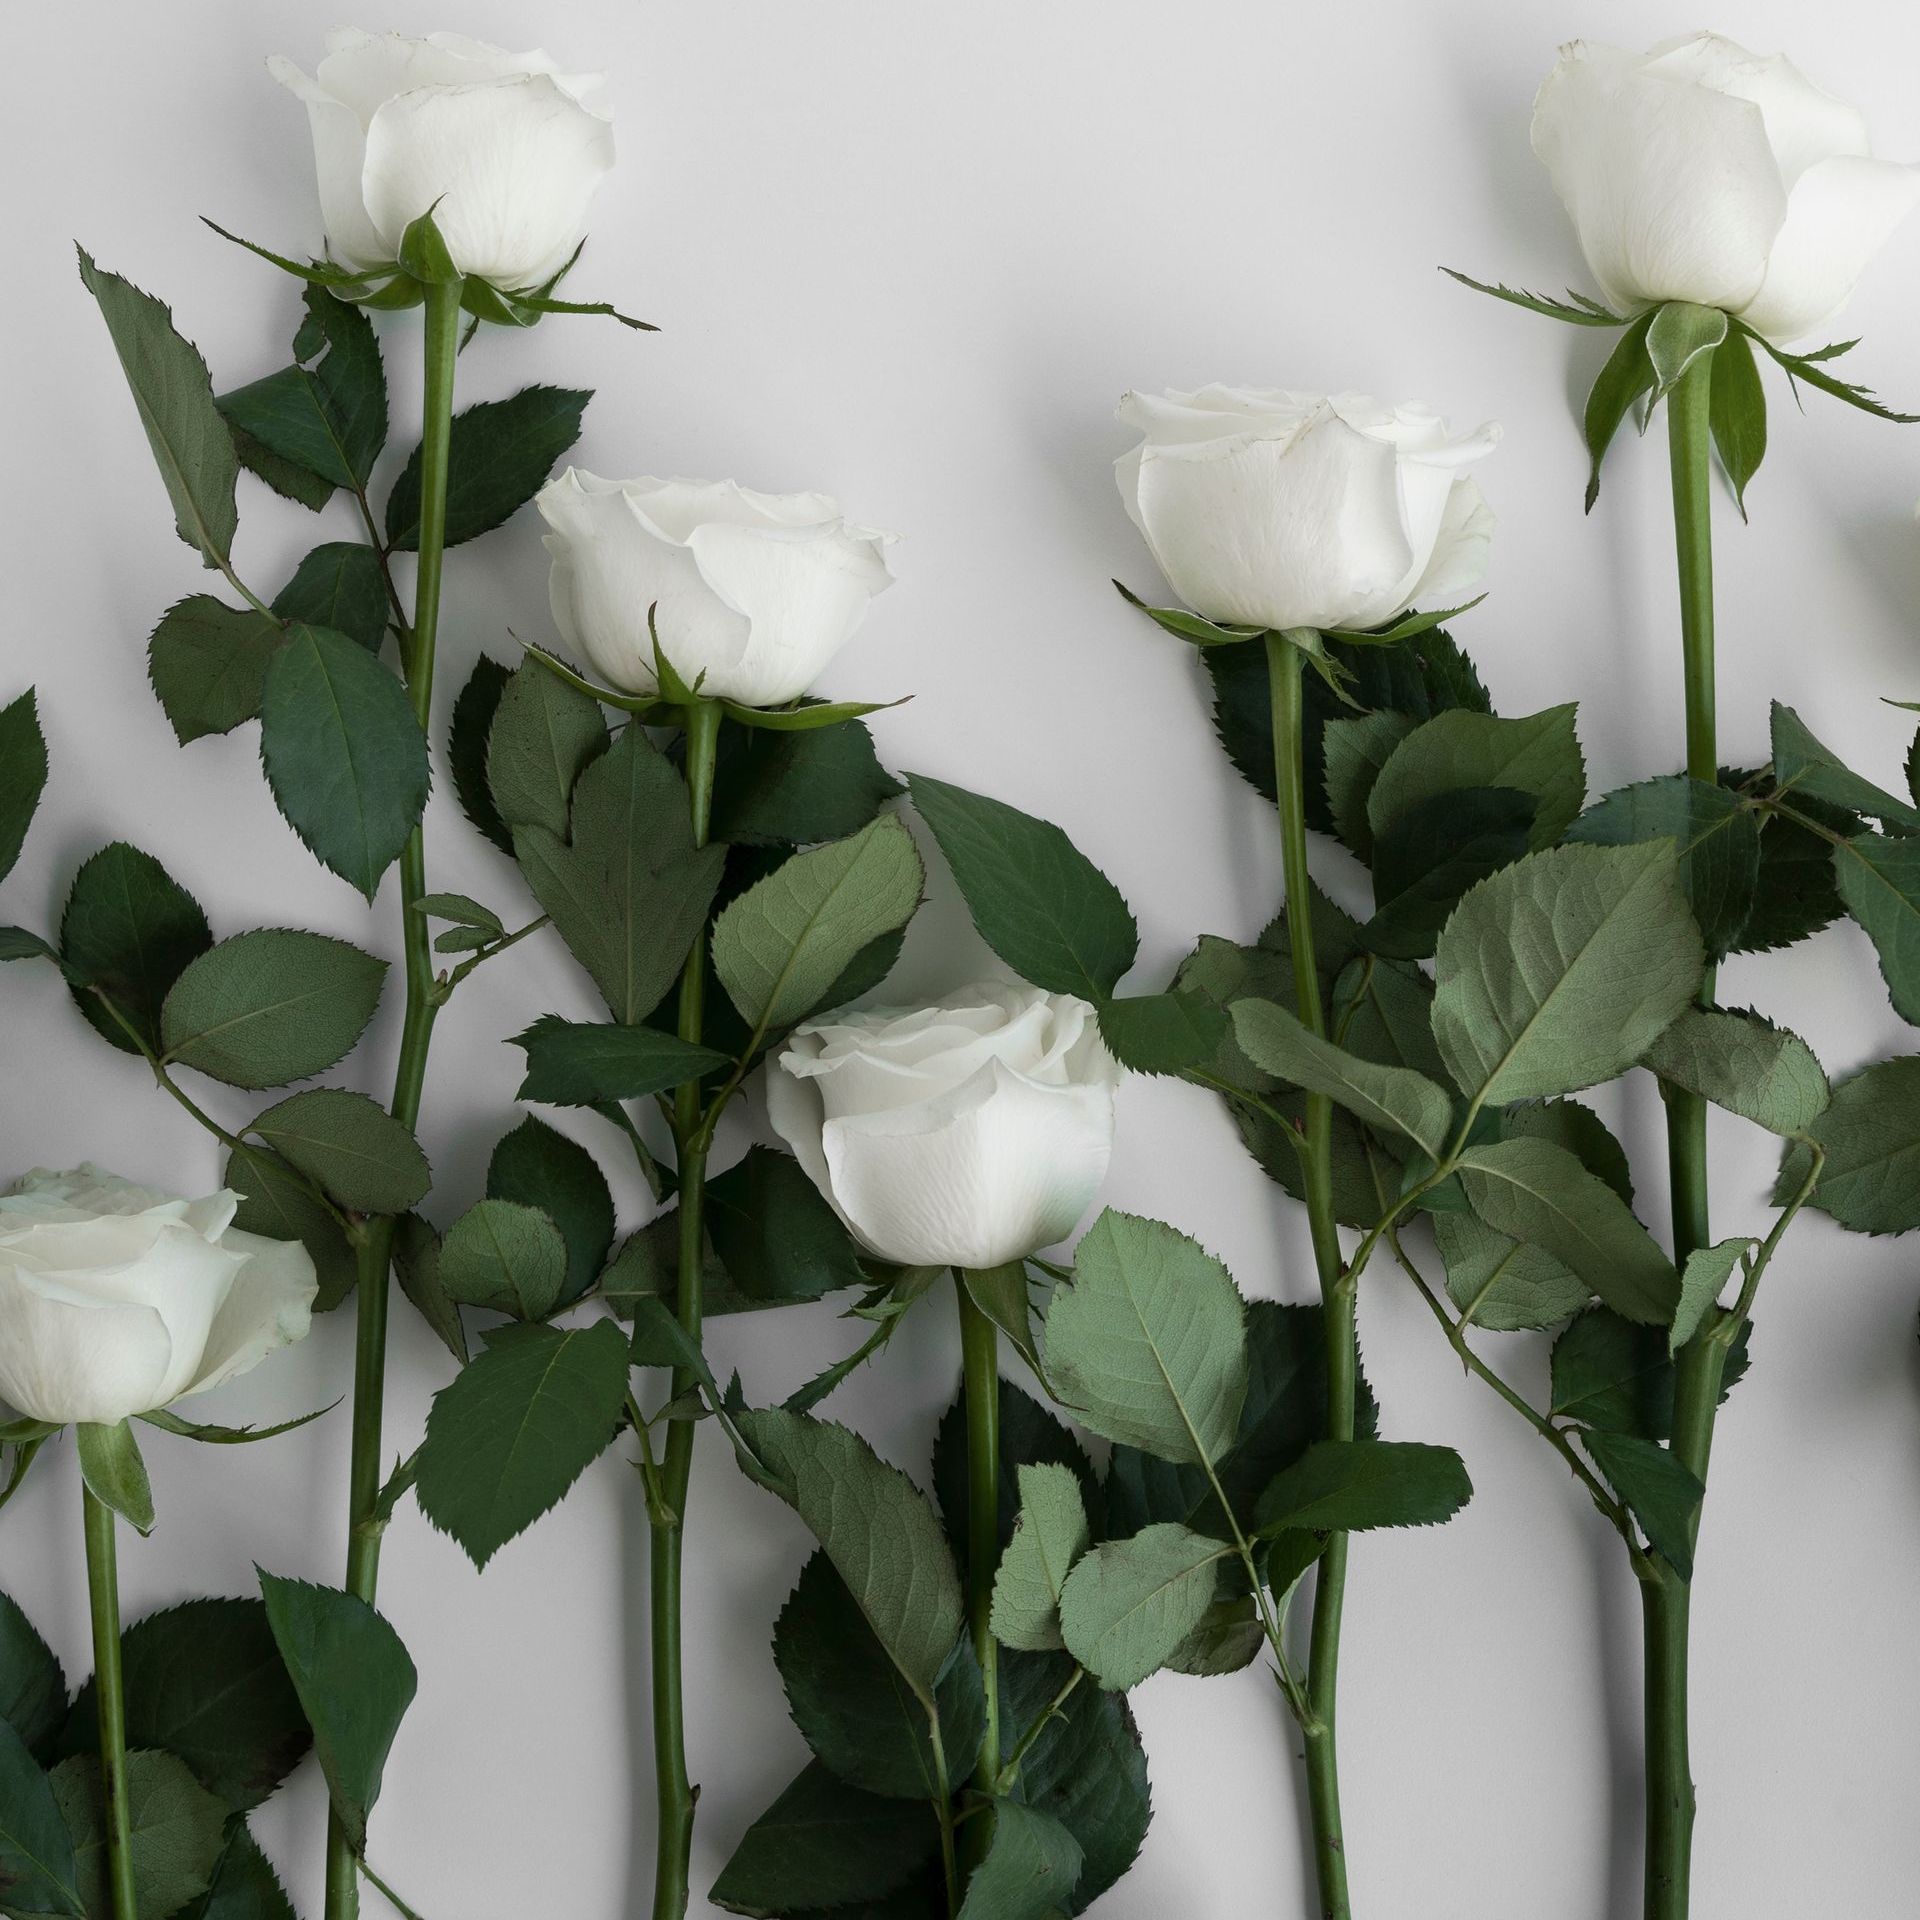 a row of white roses with green leaves on a white background